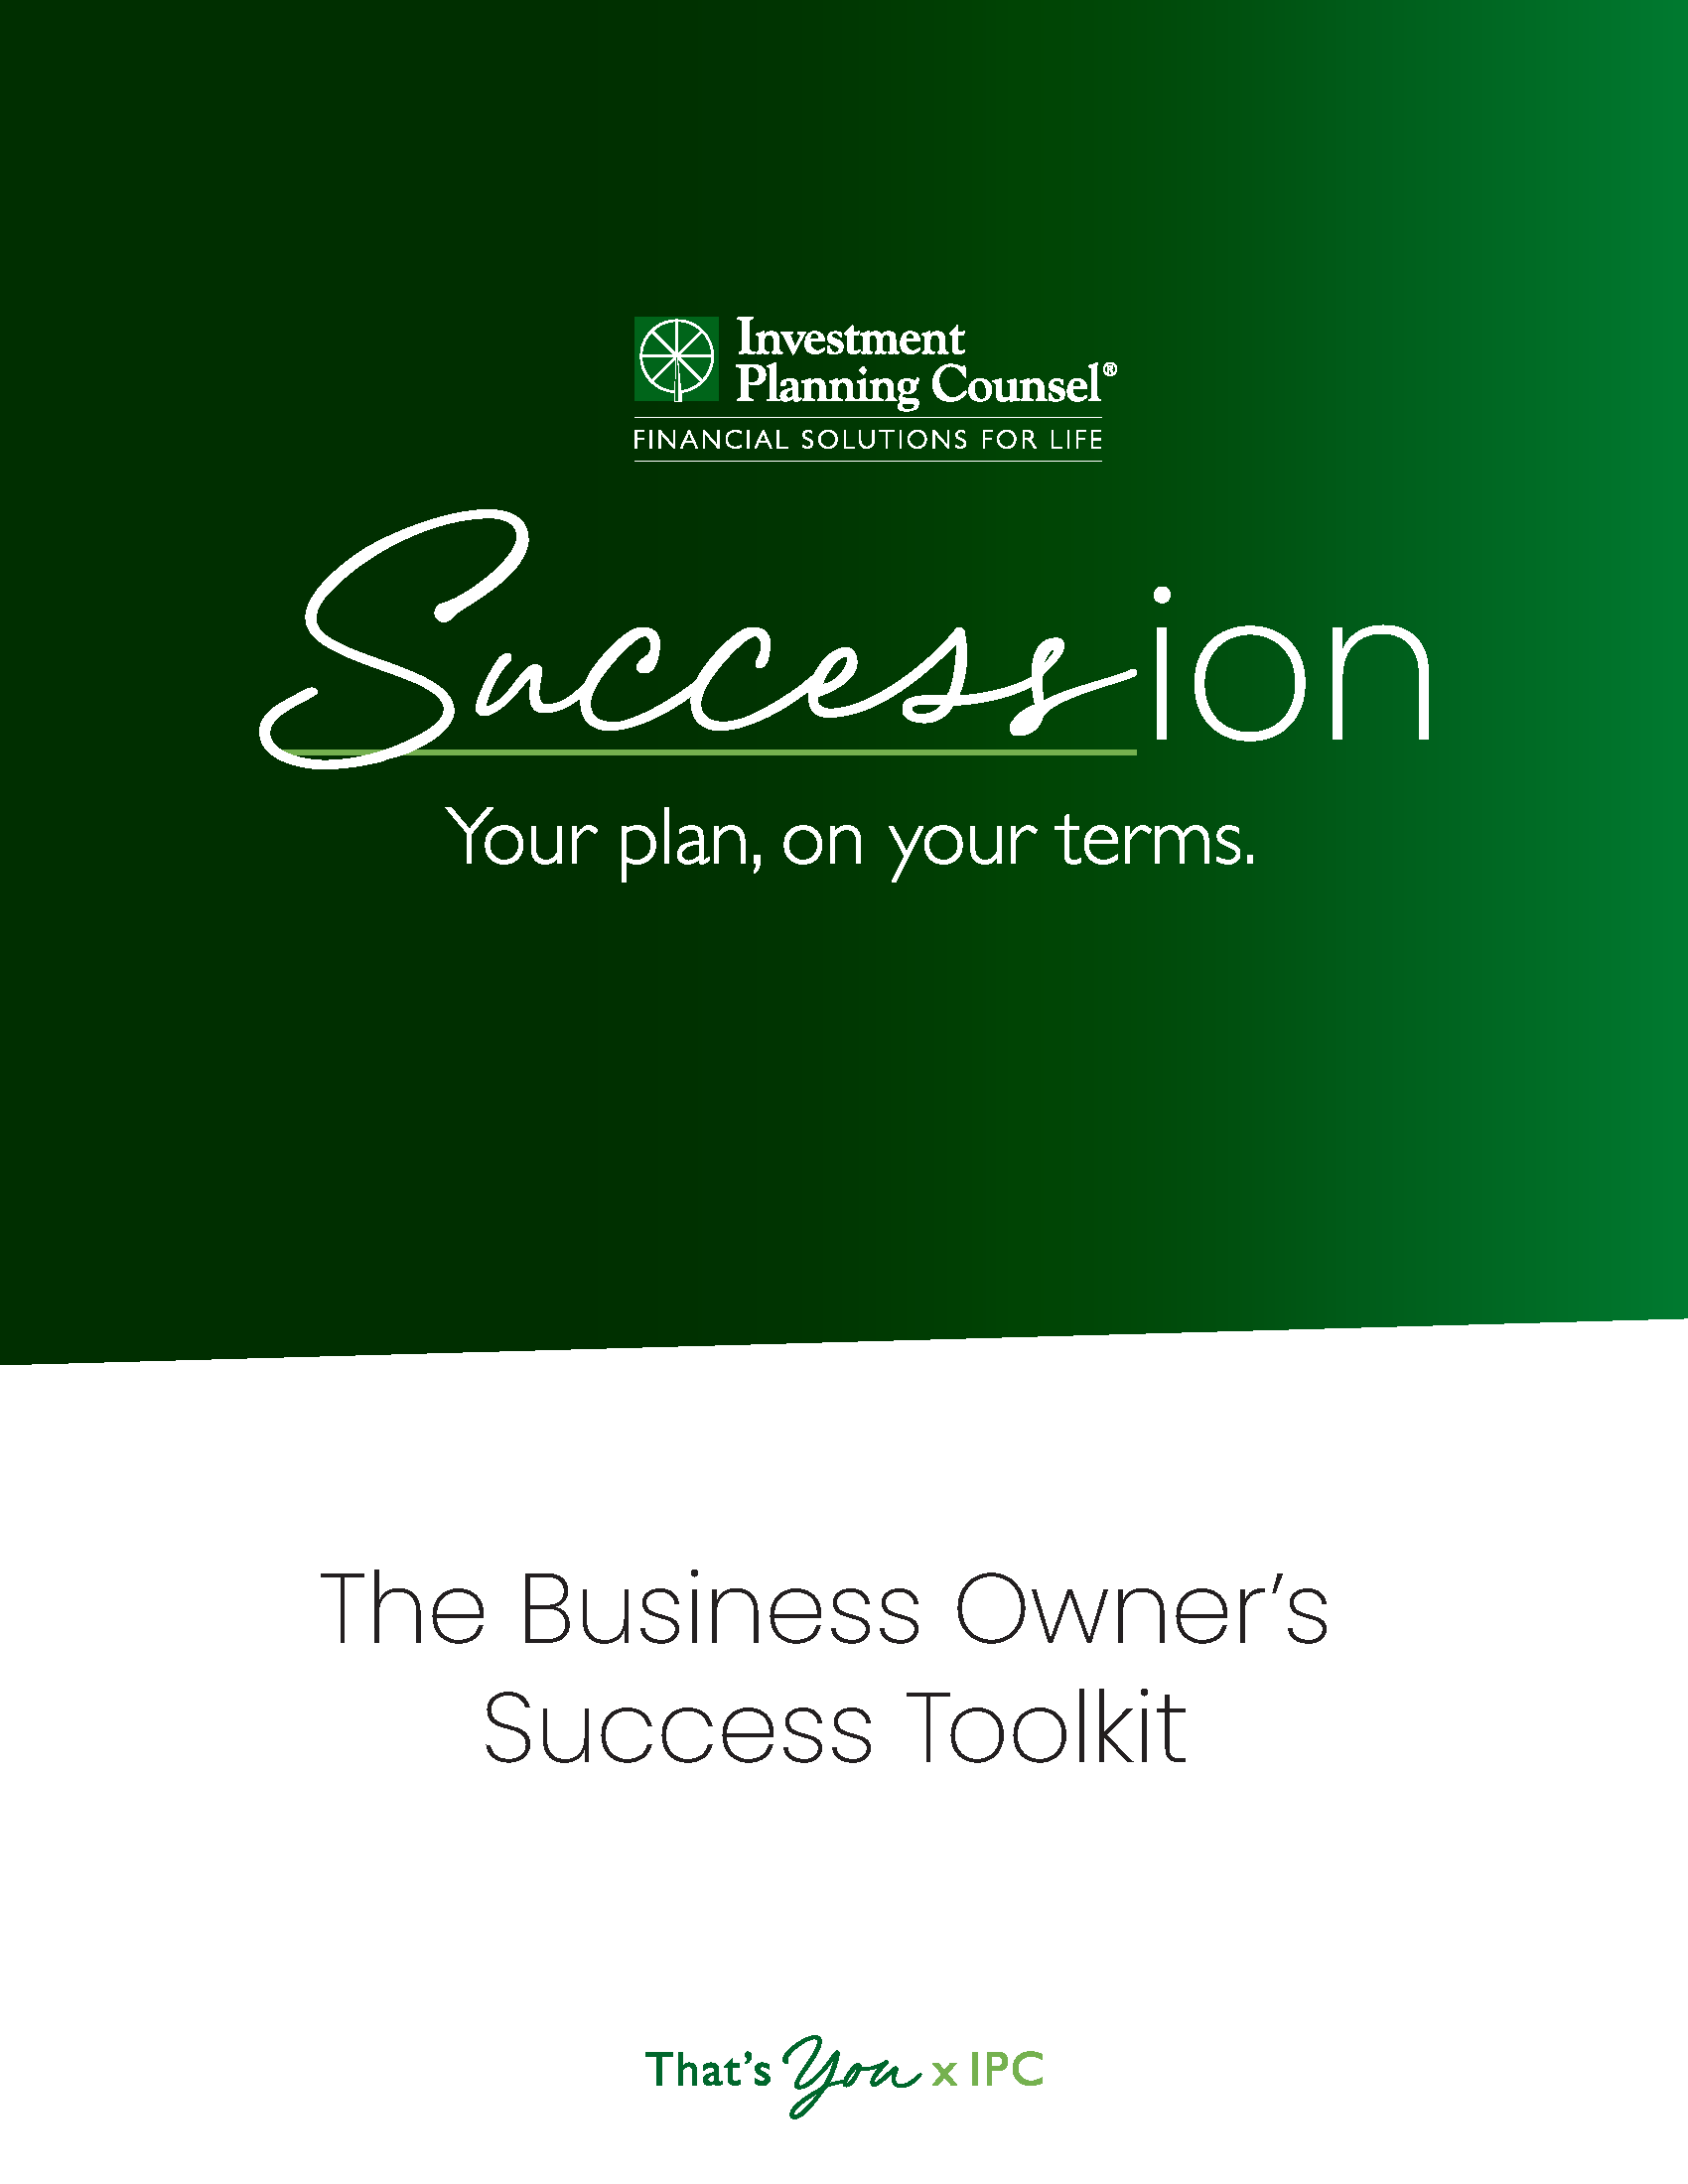 Download the Succession Toolkit for Business Owners